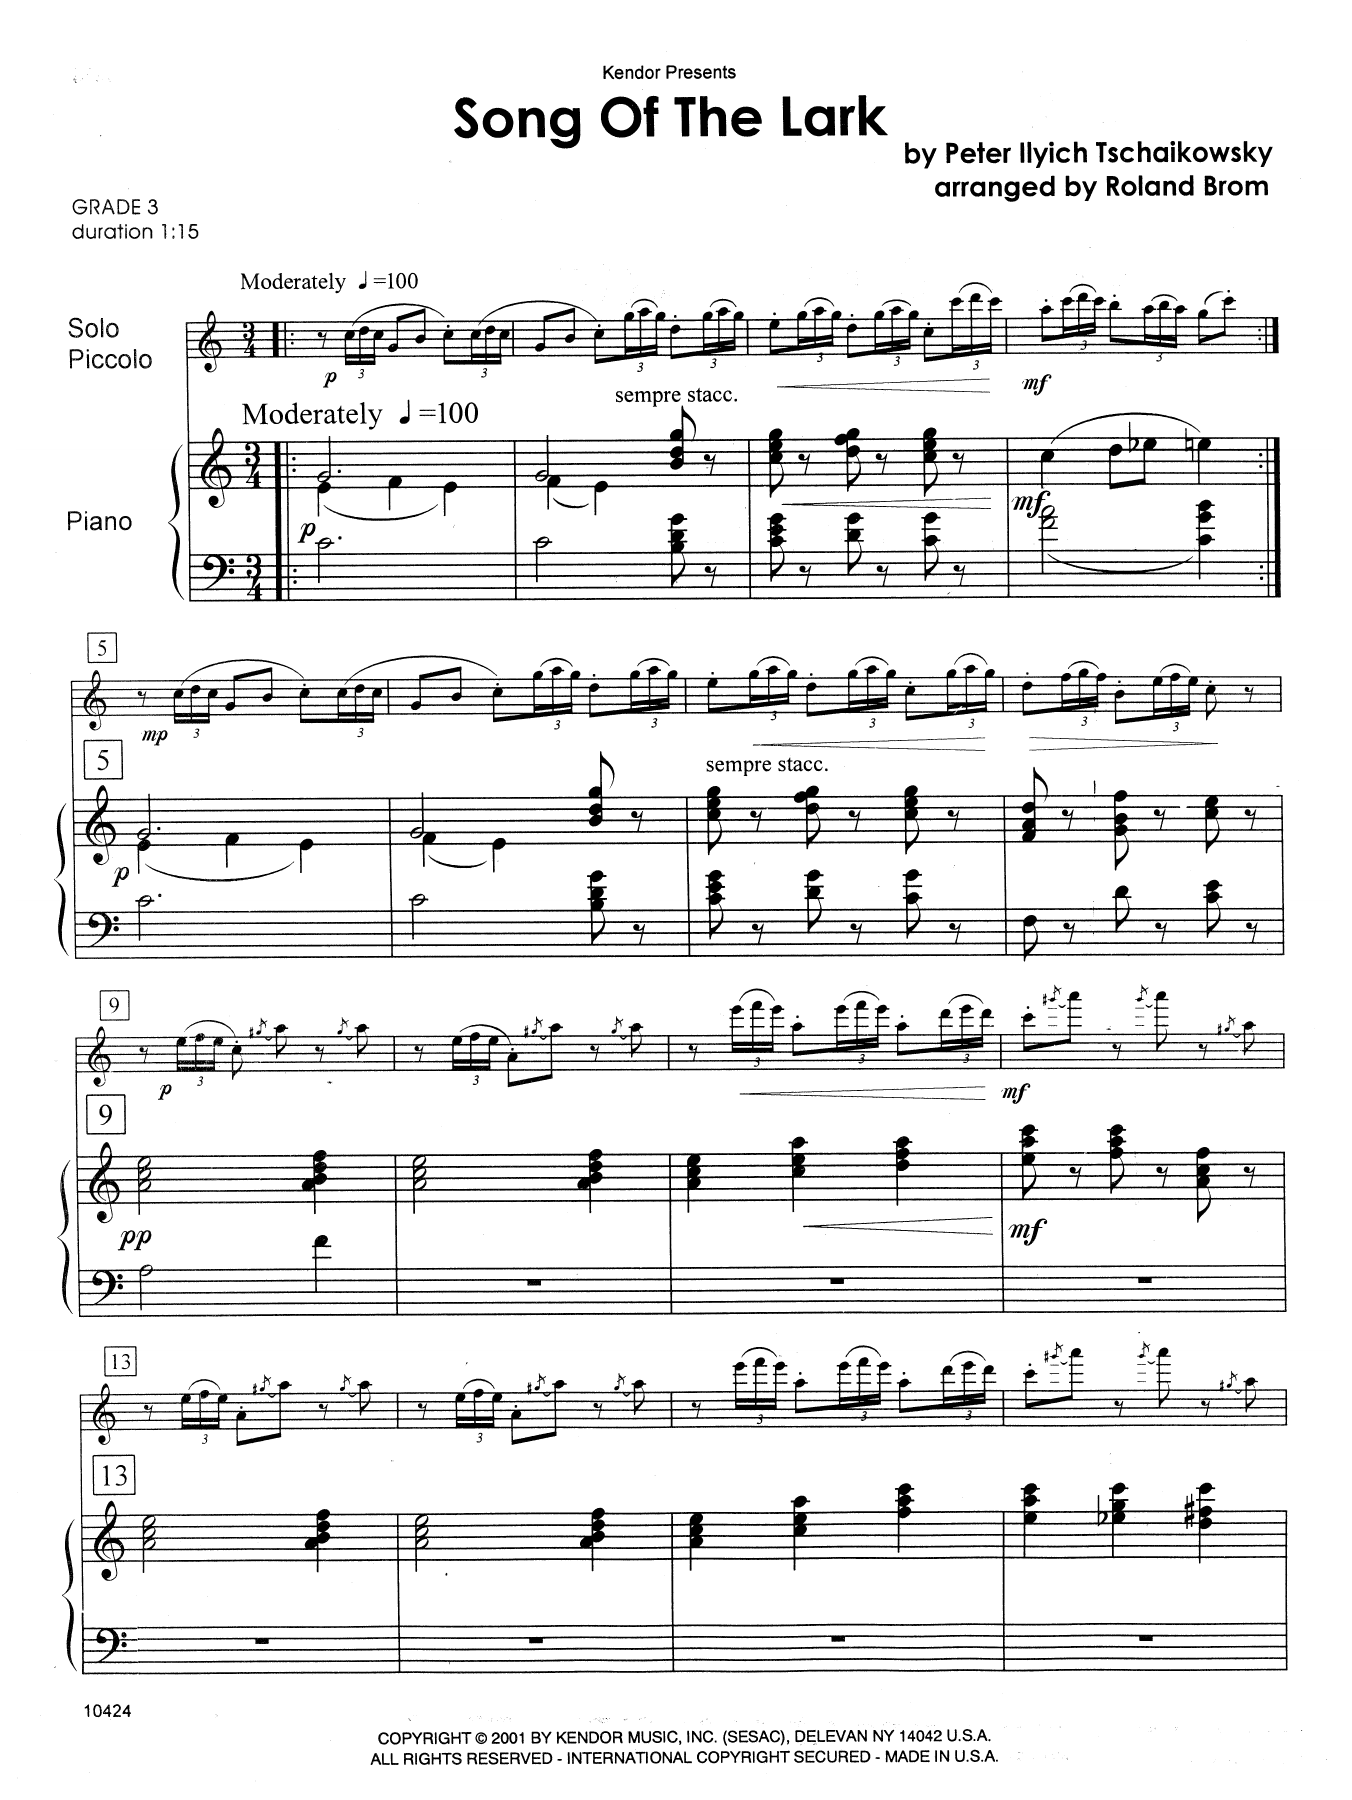 Download Brom Song of the Lark - Piano Sheet Music